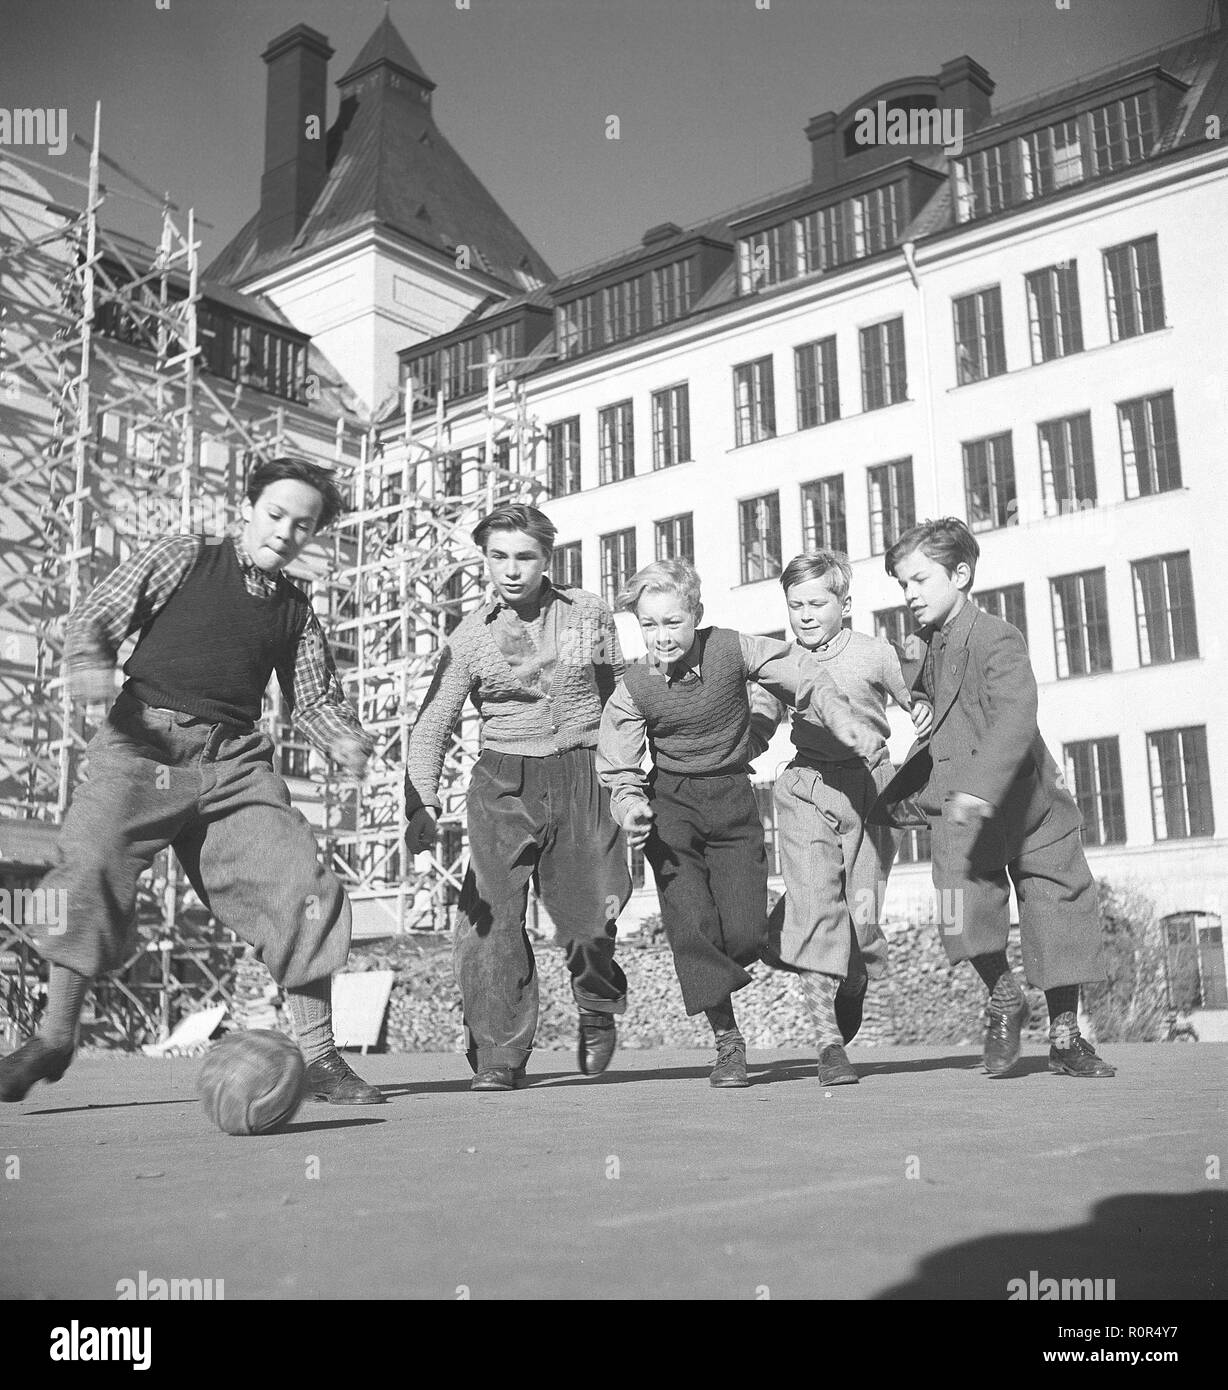 1940s boy playing soccer. A group of boys dressed in typical 1940s trousers are playing football on the school yard. Sweden 1940s Photo Kristoffersson ref AE25-4 Stock Photo